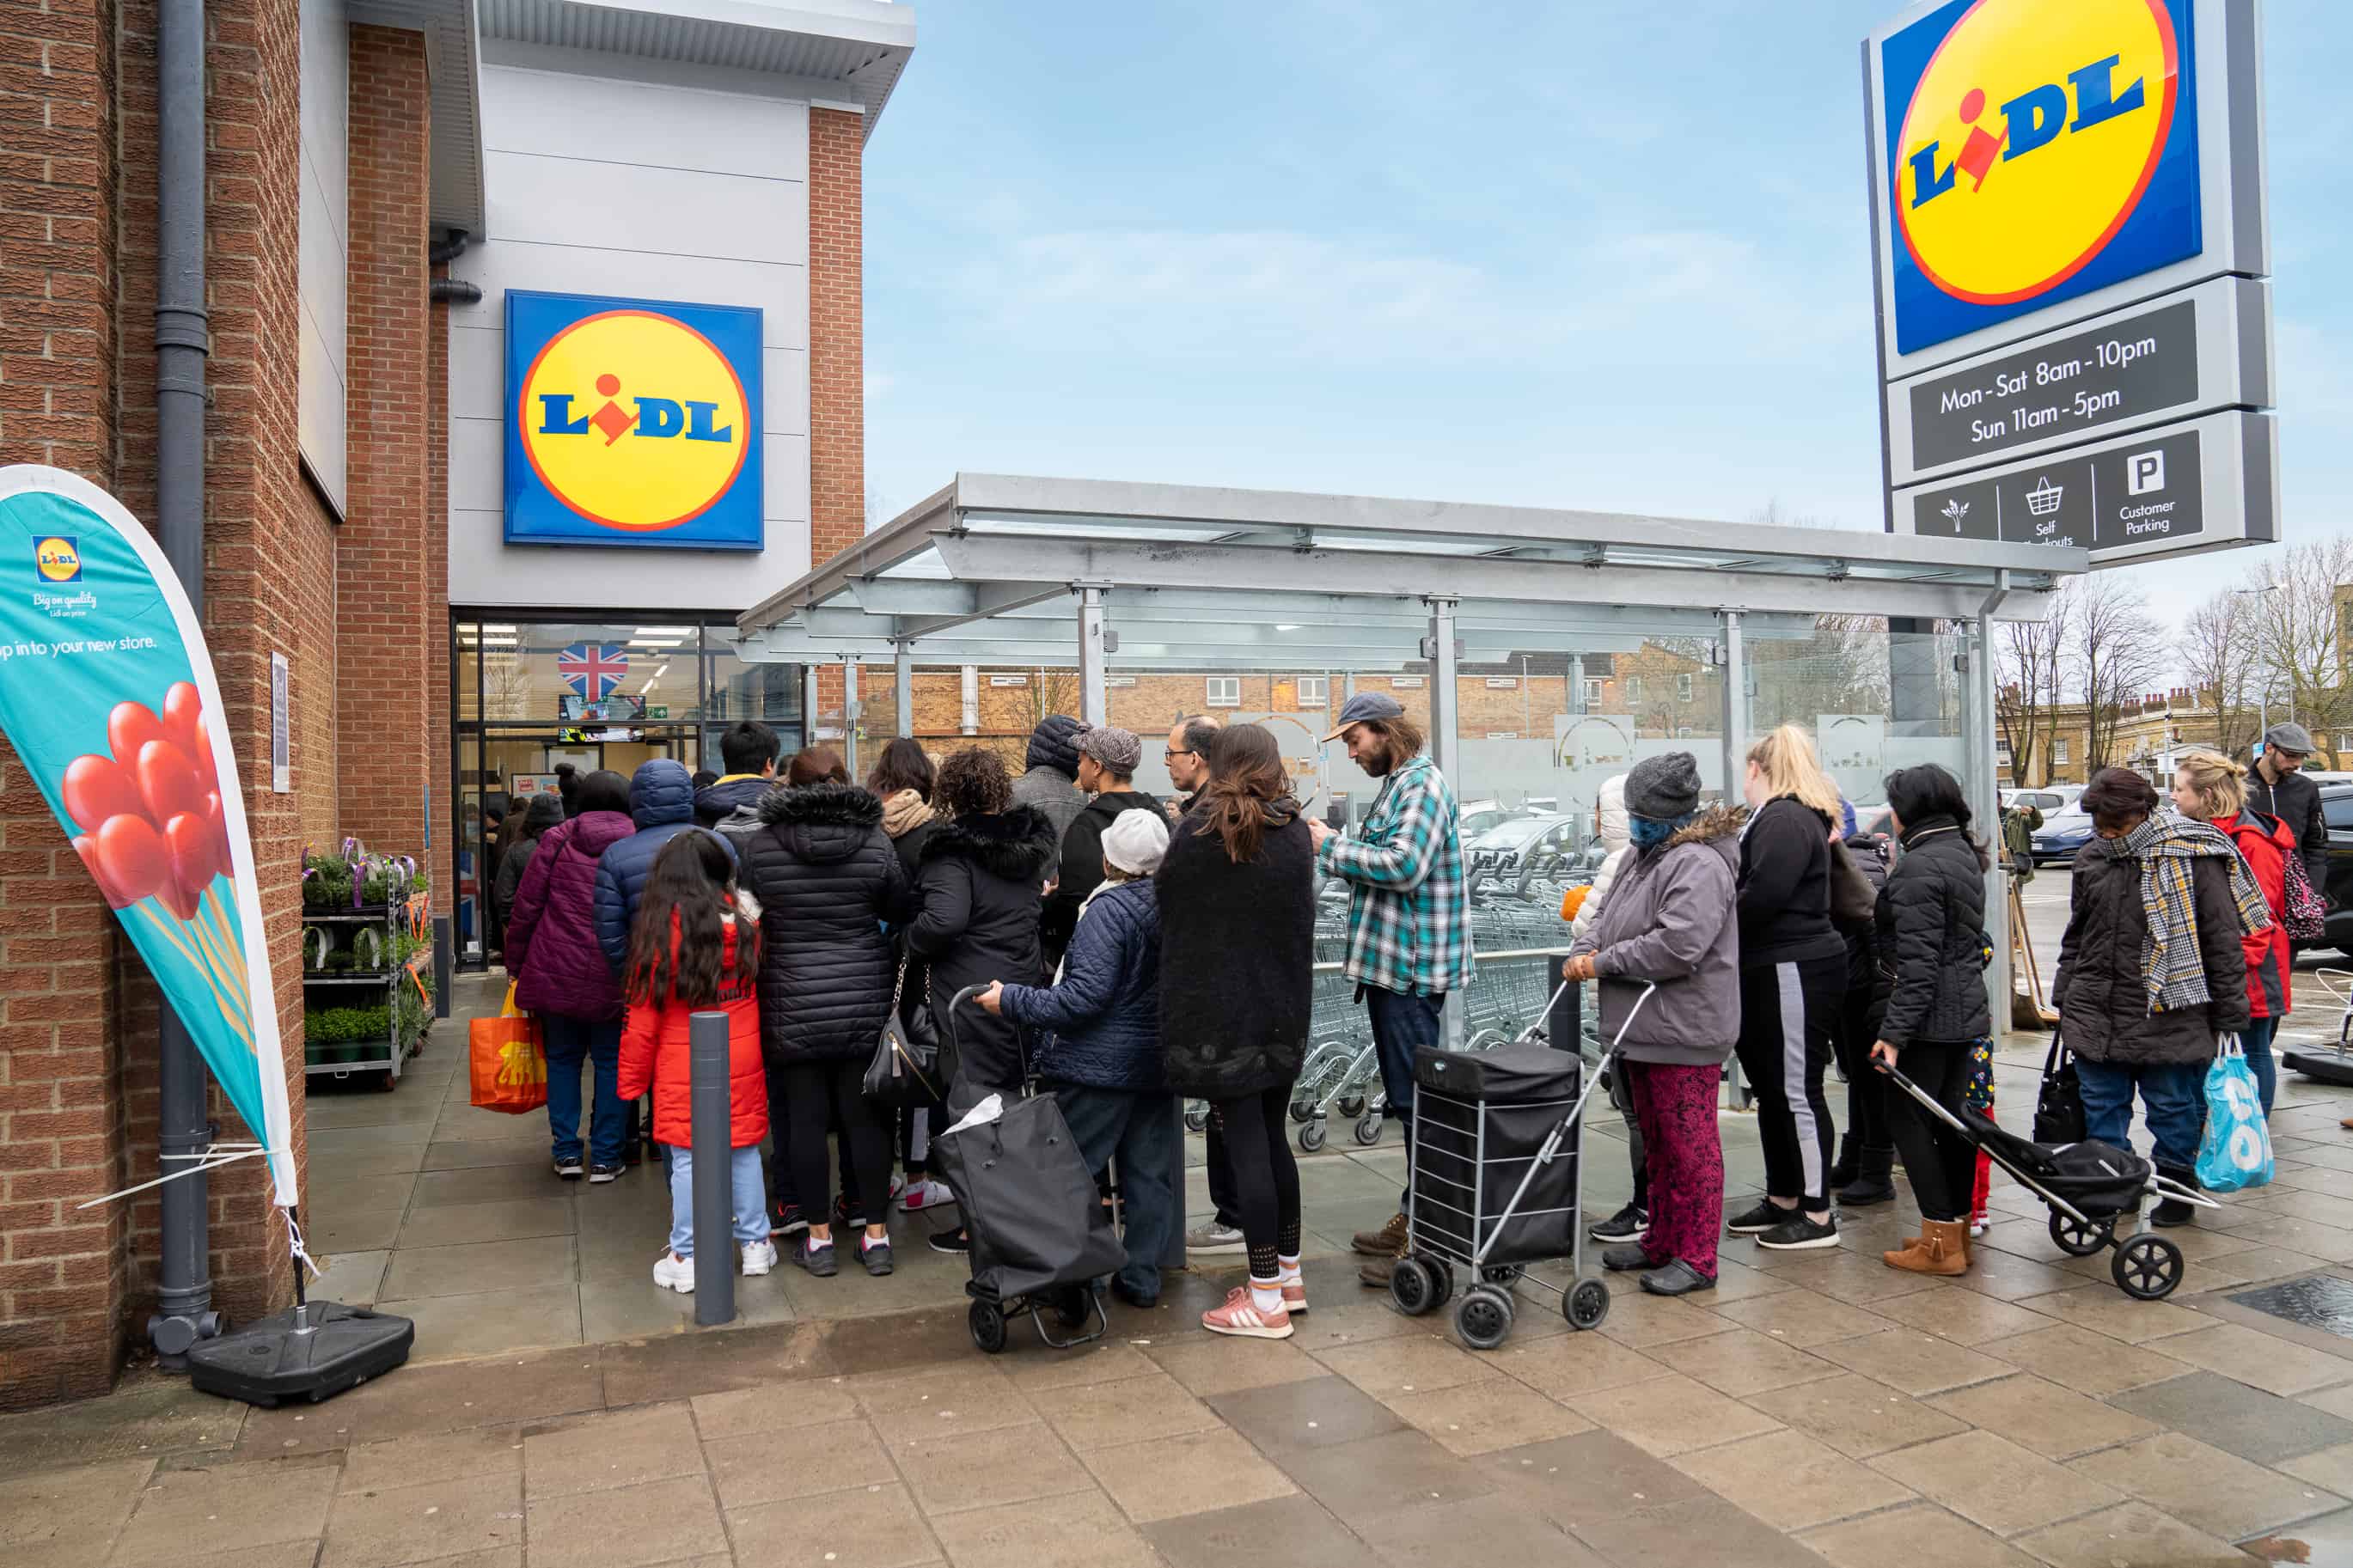 Lidl's new outlet on the Old Kent Road